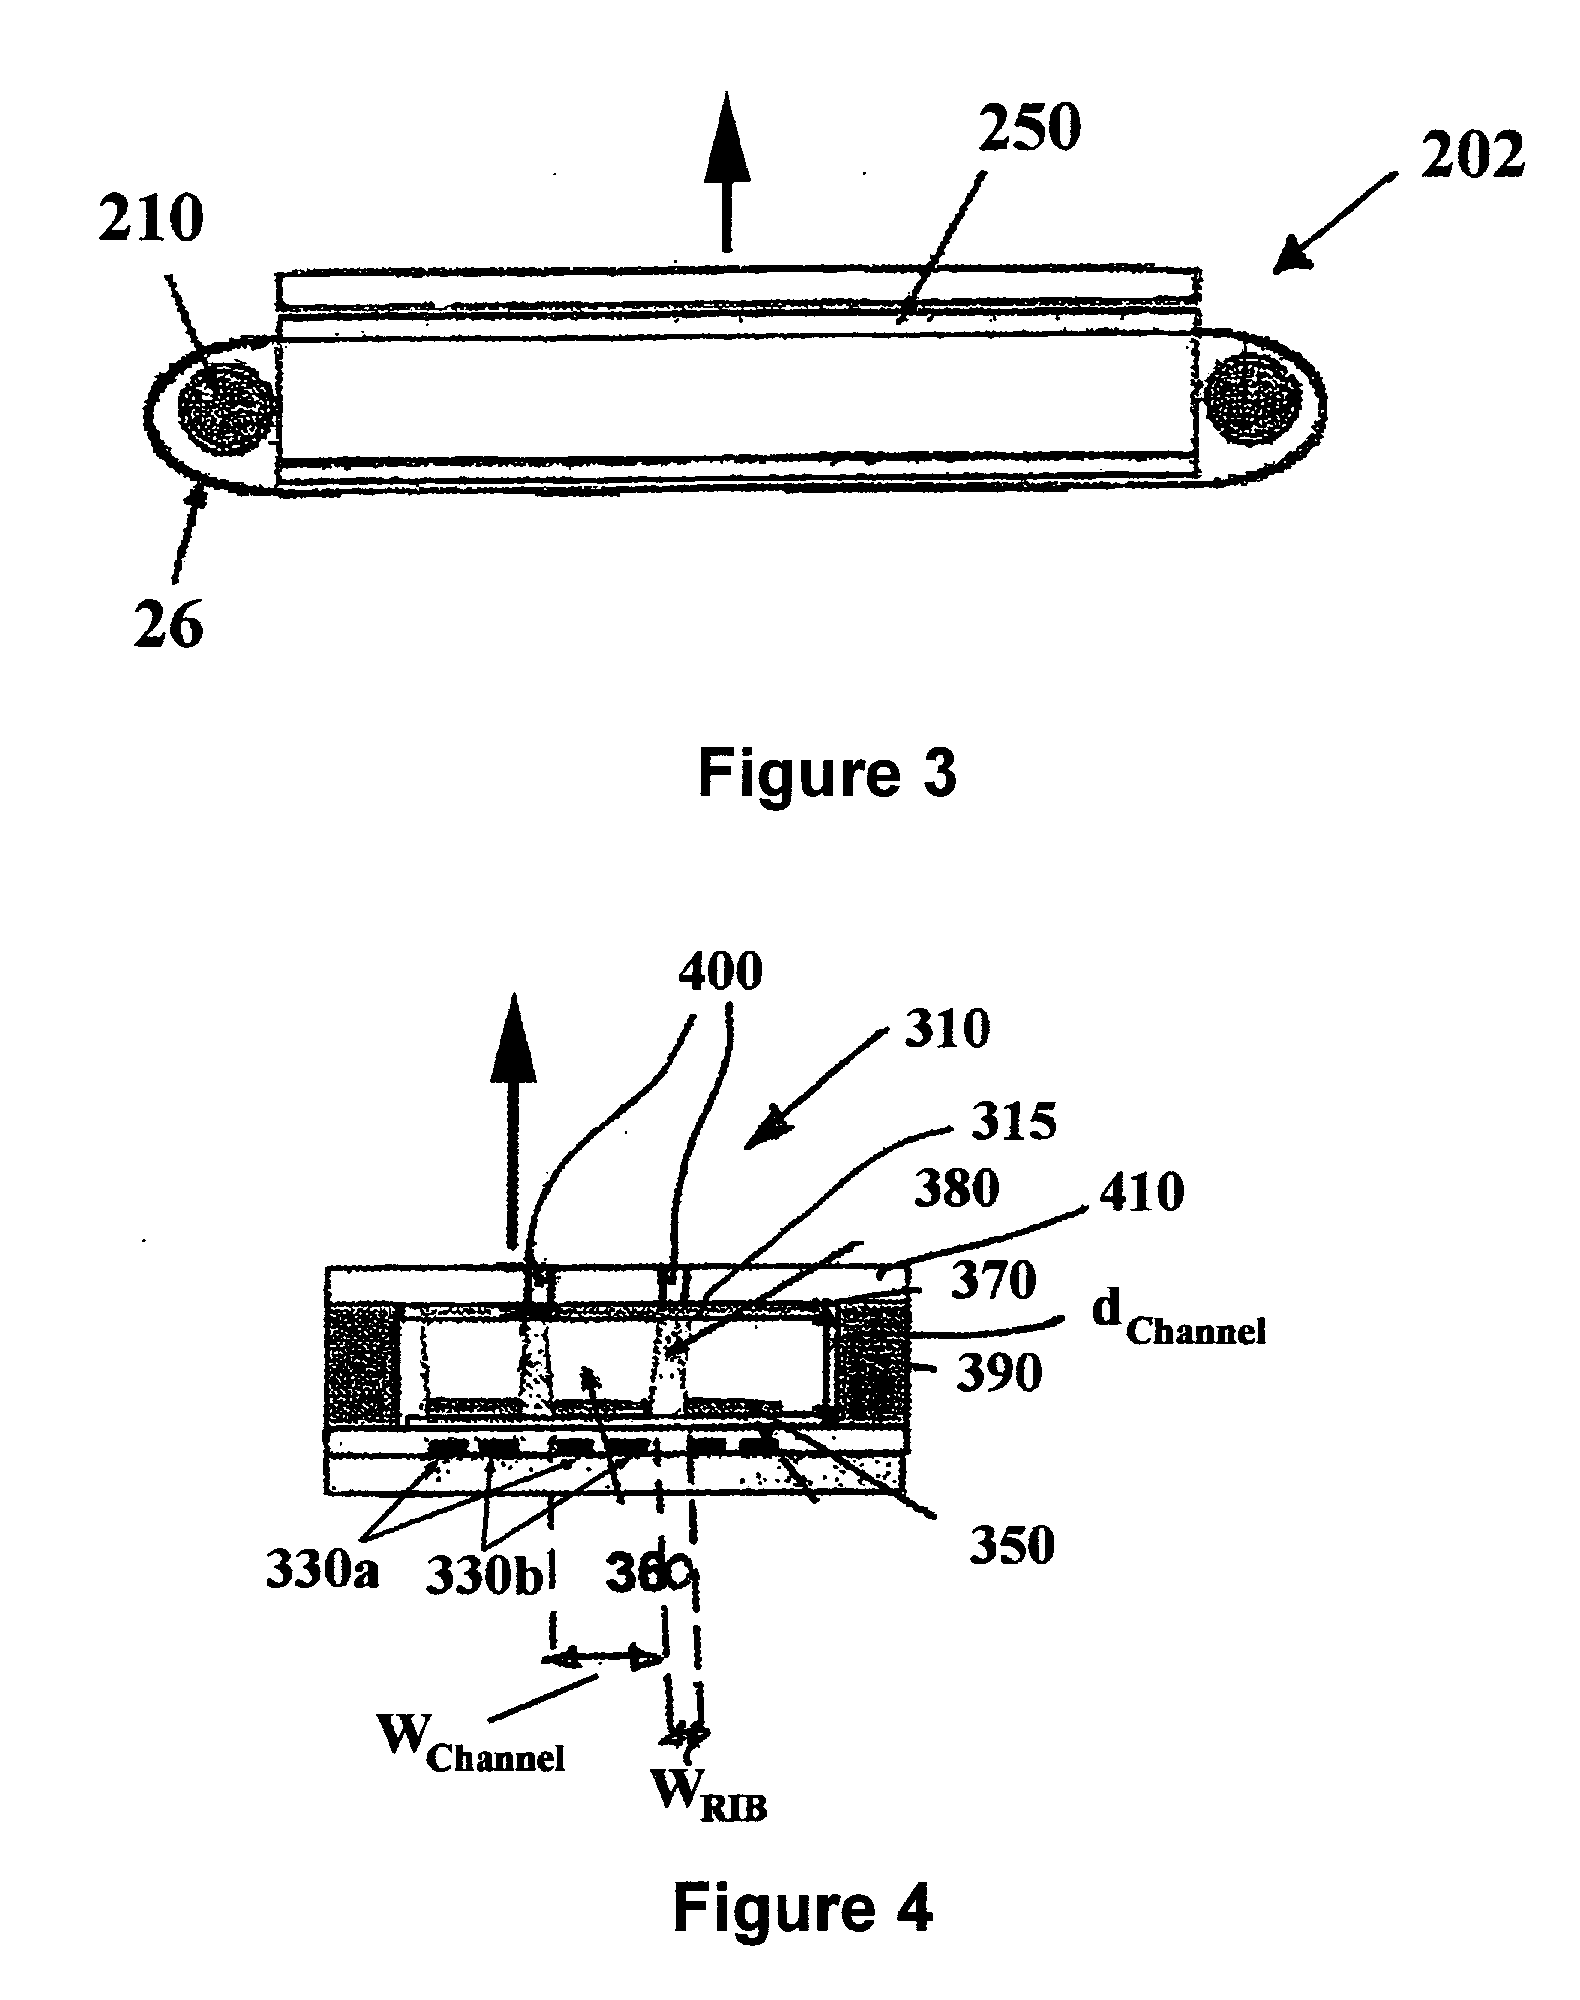 Backlight system with ir absorption properties